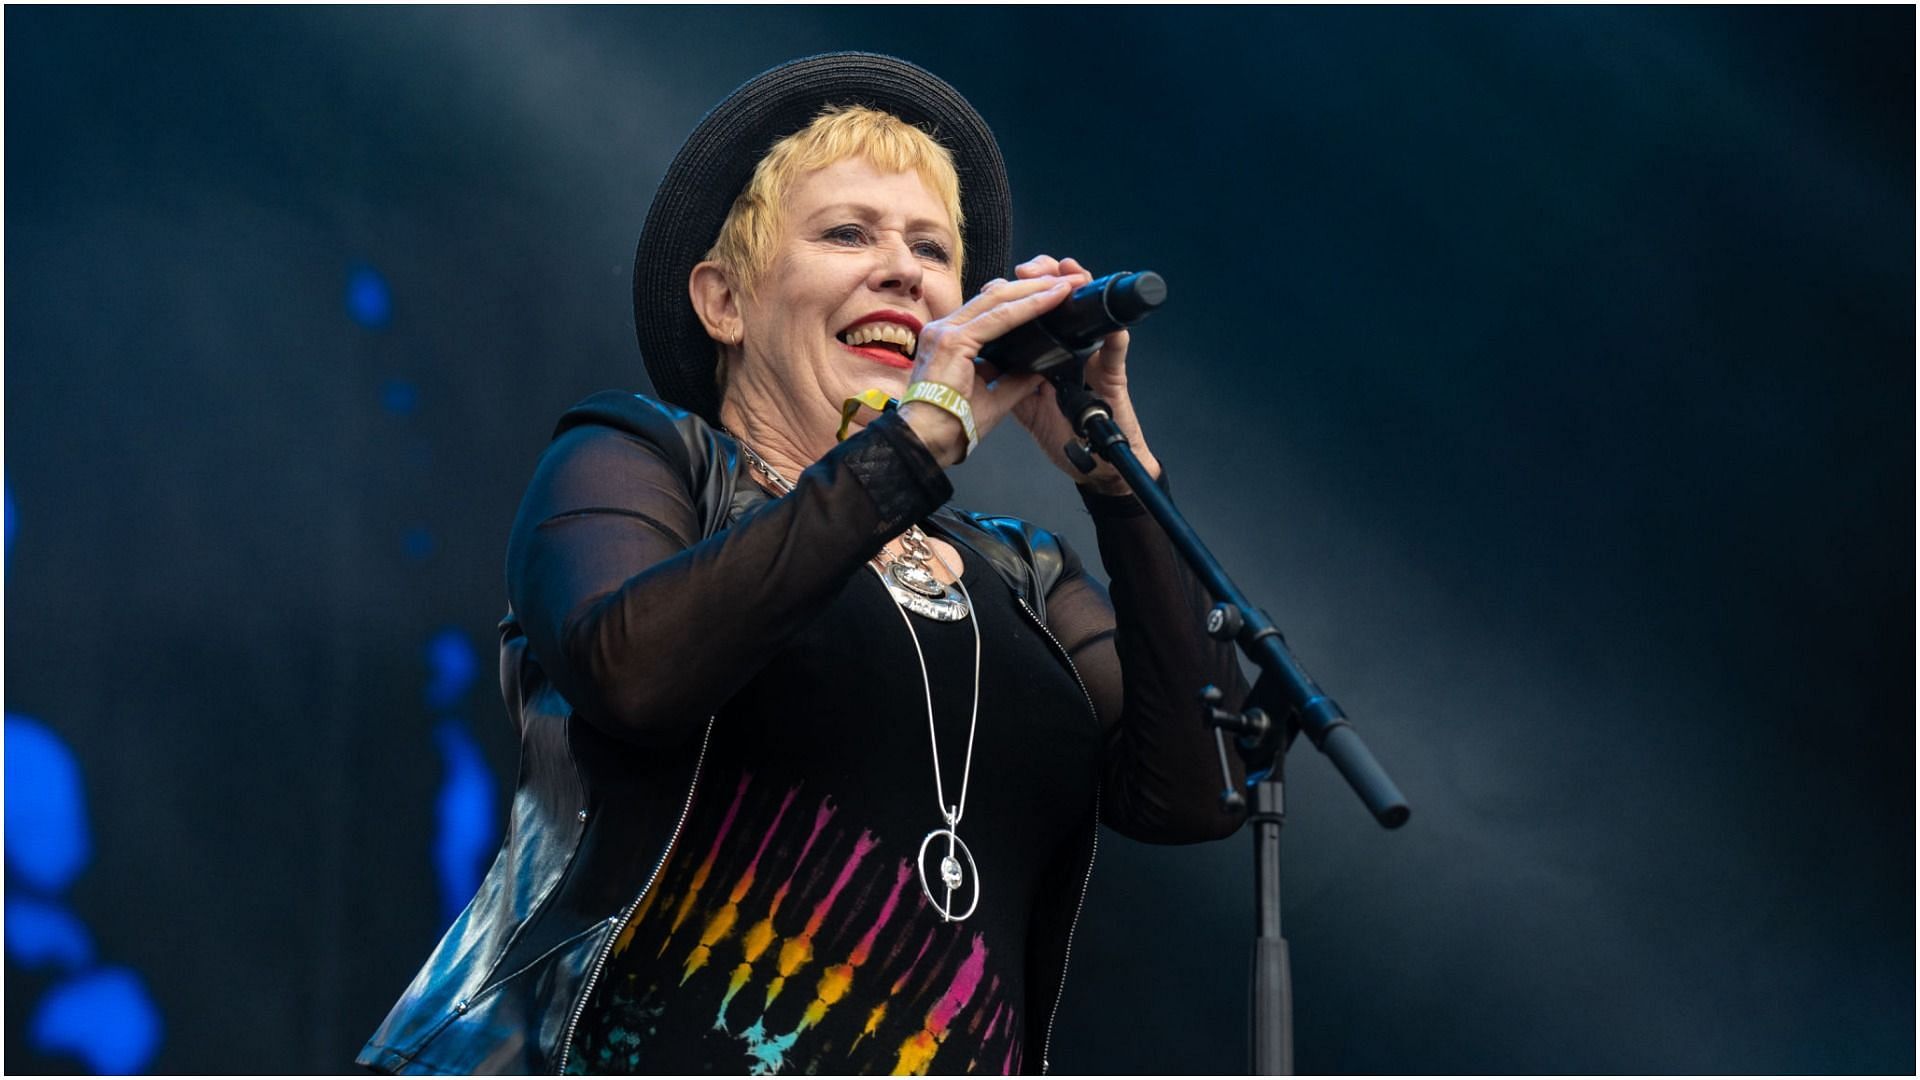 Hazel O&#039;Connor performs on stage during Rewind Scotland 2019 at Scone Palace (Image via Lorne Thomson/Getty Images)